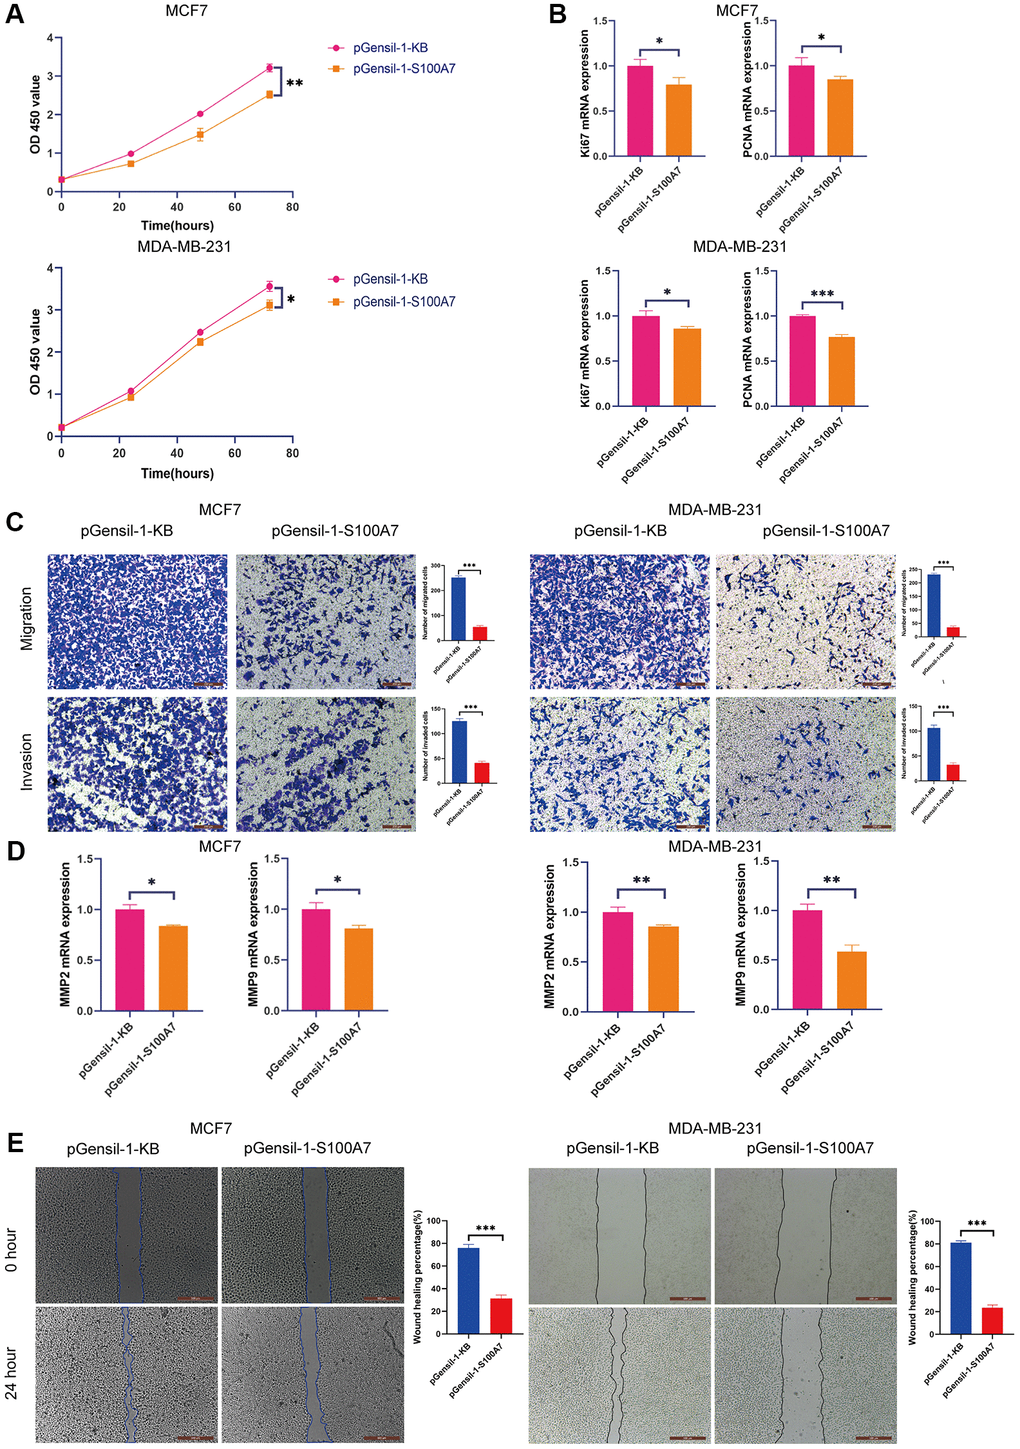 S100A7 promotes the proliferation, migration, and invasion of breast cancer cells in vitro. (A) The CCK-8 assay showed that knockdown S100A7 reduced the proliferation of MCF7 and MDA-MB-231 cells. (B) RT-qPCR showed that knockdown of S100A7 reduced the expression of the proliferation biomarkers Ki67 and PCNA. (C) The Transwell assay showed that knockdown of S100A7 attenuated the migration and invasion of MCF7 and MDA-MB-231 cells. (D) RT-qPCR showed that knockdown of S100A7 reduced the expression of the migration biomarkers MMP2 and MMP9. (E) The wound healing assay showed that knockdown of S100A7 decreased the migration of MCF7 and MDA-MB-231 cells. *P **P ***P 